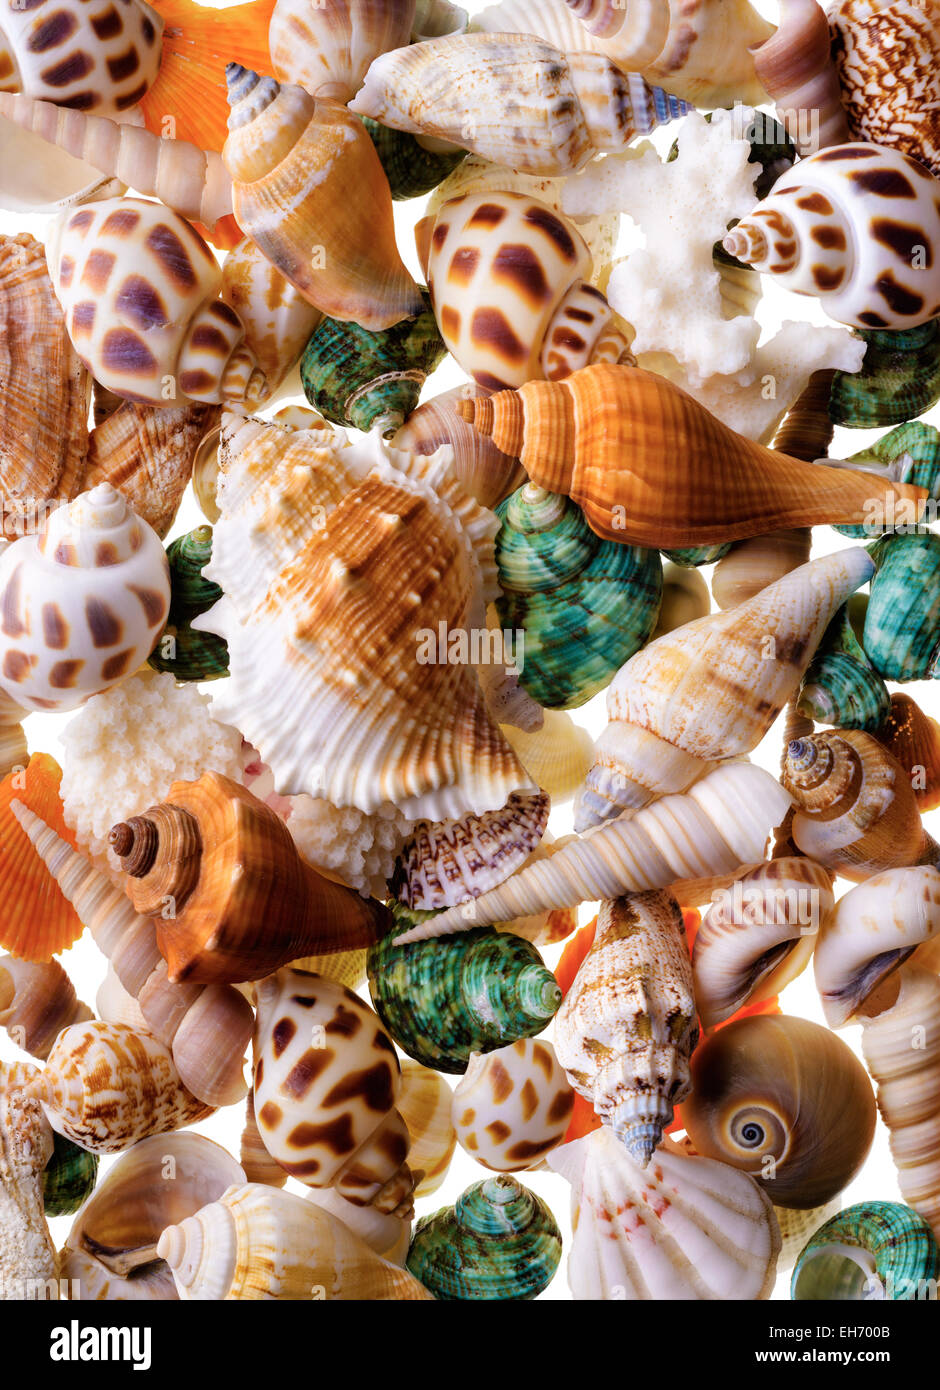 Backgrounds and textures: mix of assorted seashells Stock Photo